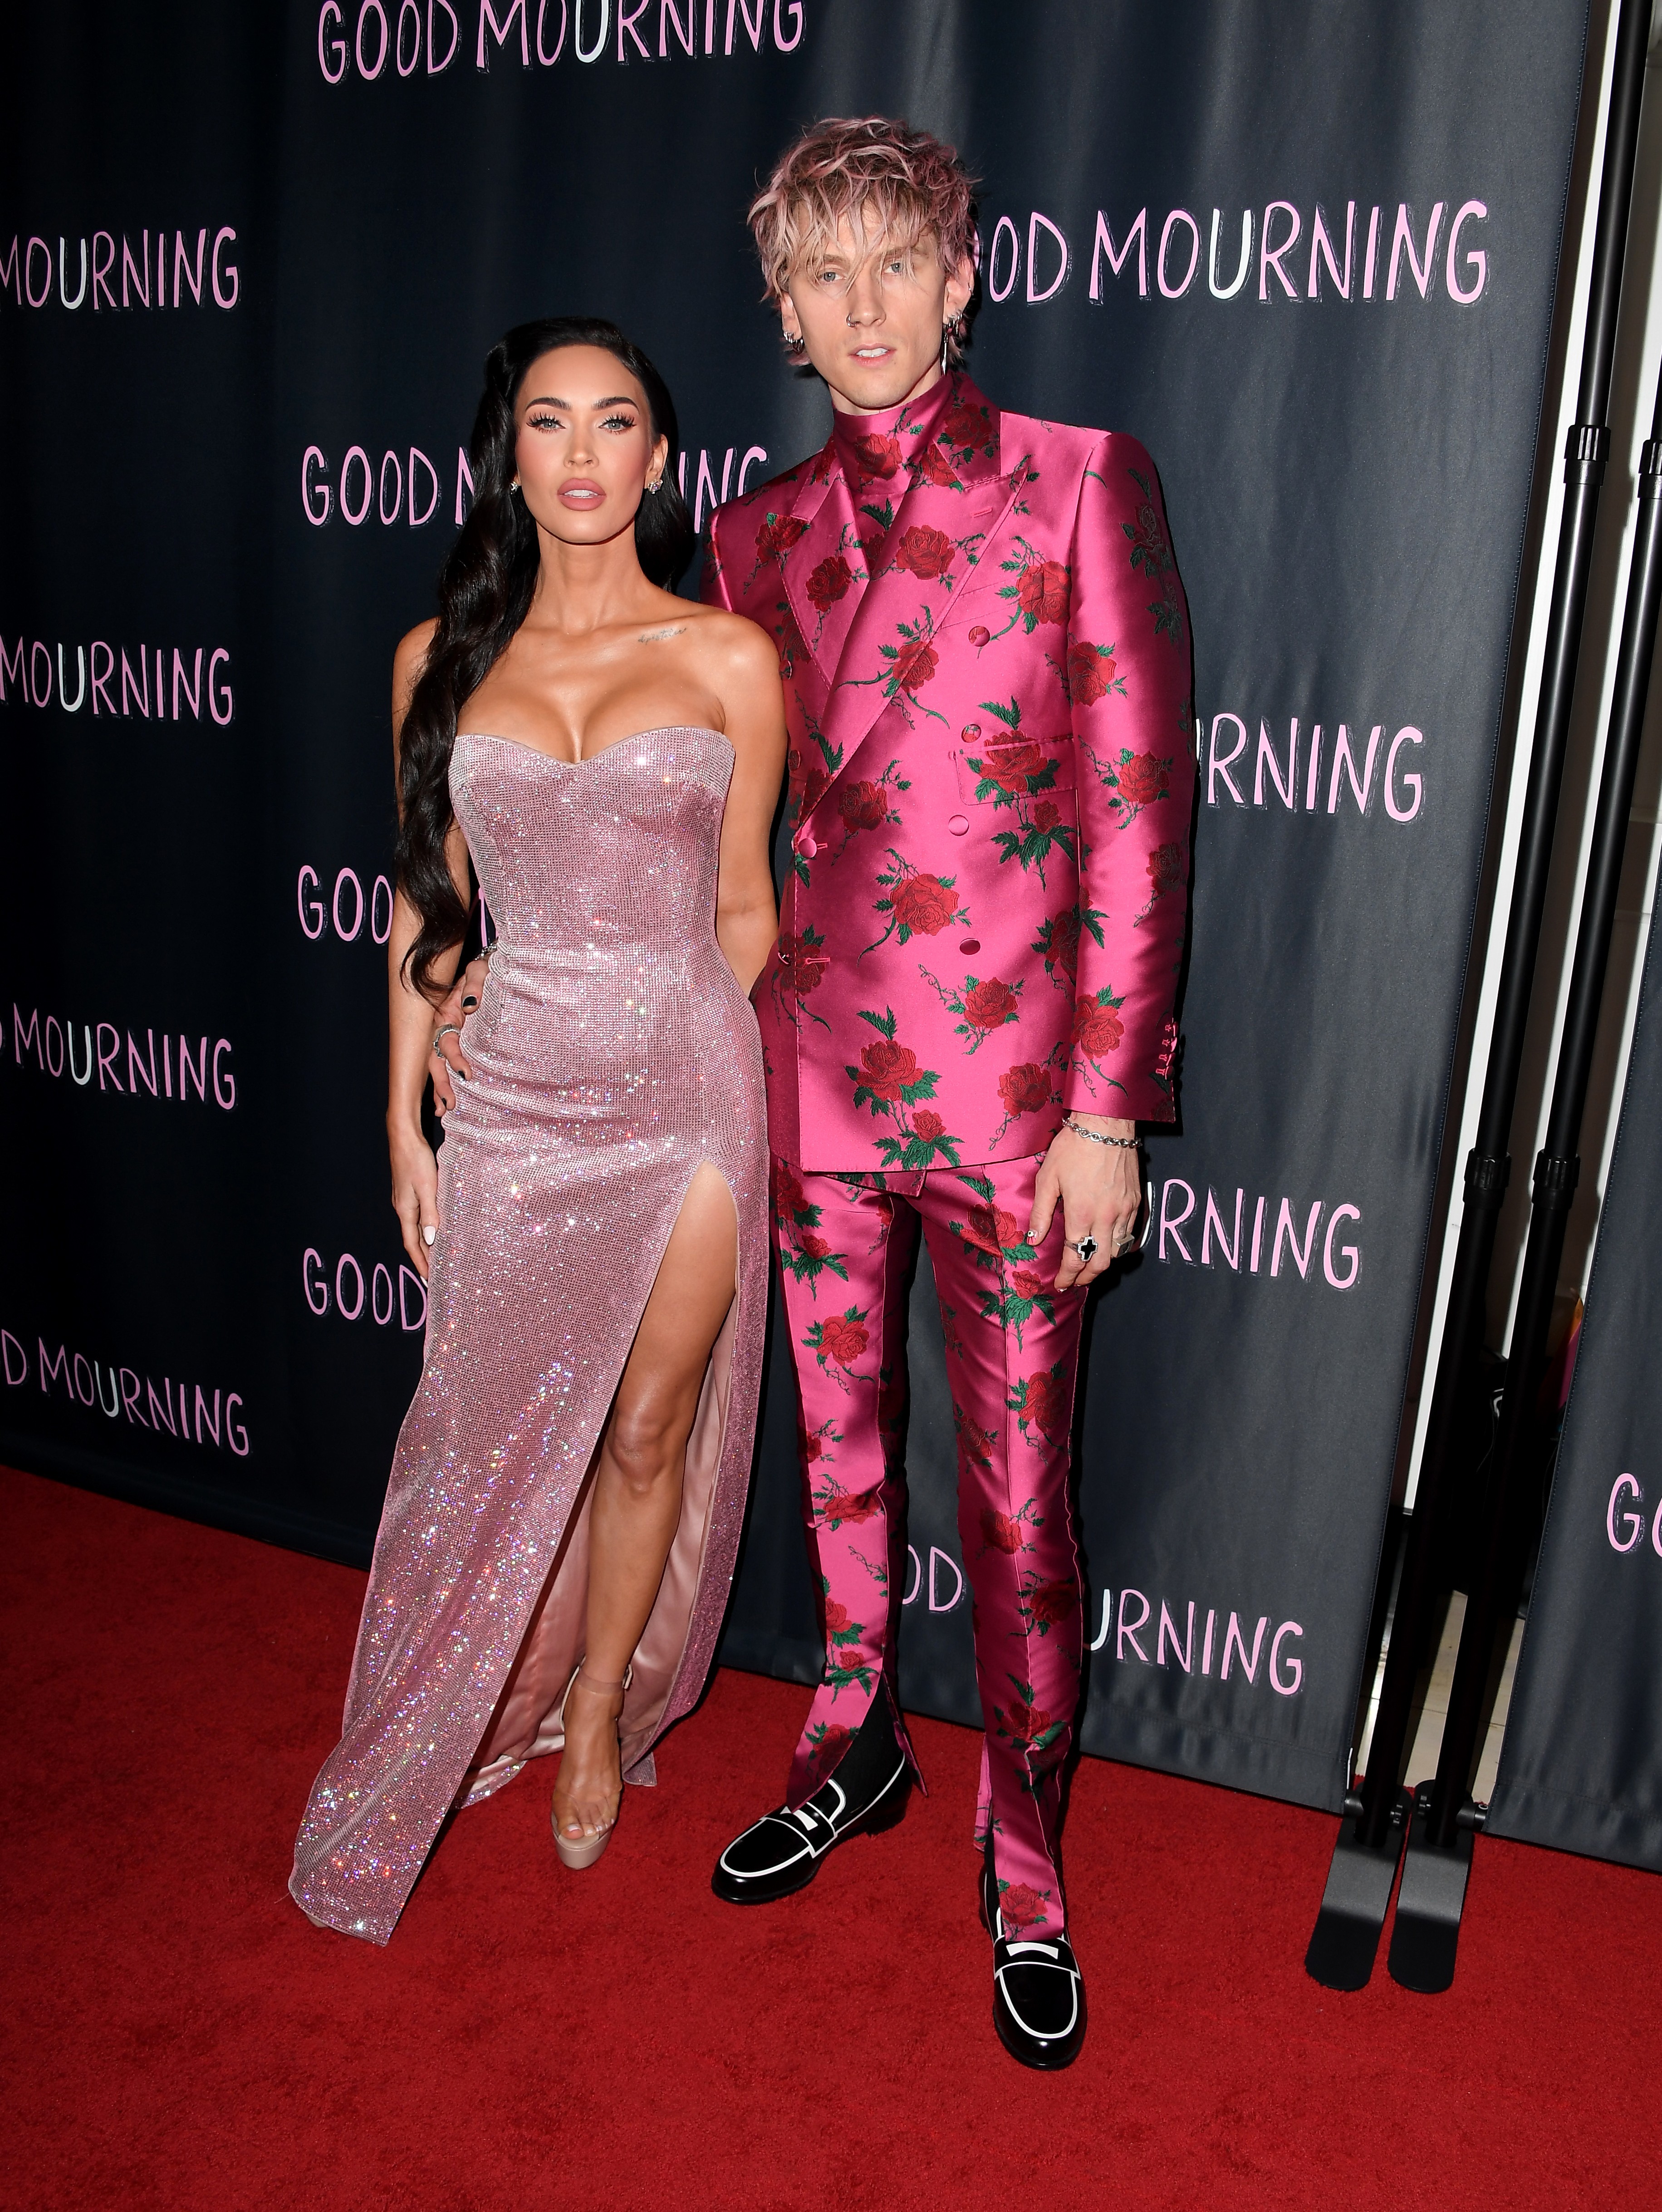 Megan Fox and her fiance, Machine Gun Kelly, at the premiere of Good Mourning (2022), a film directed by the musician (Photo: Getty Images)